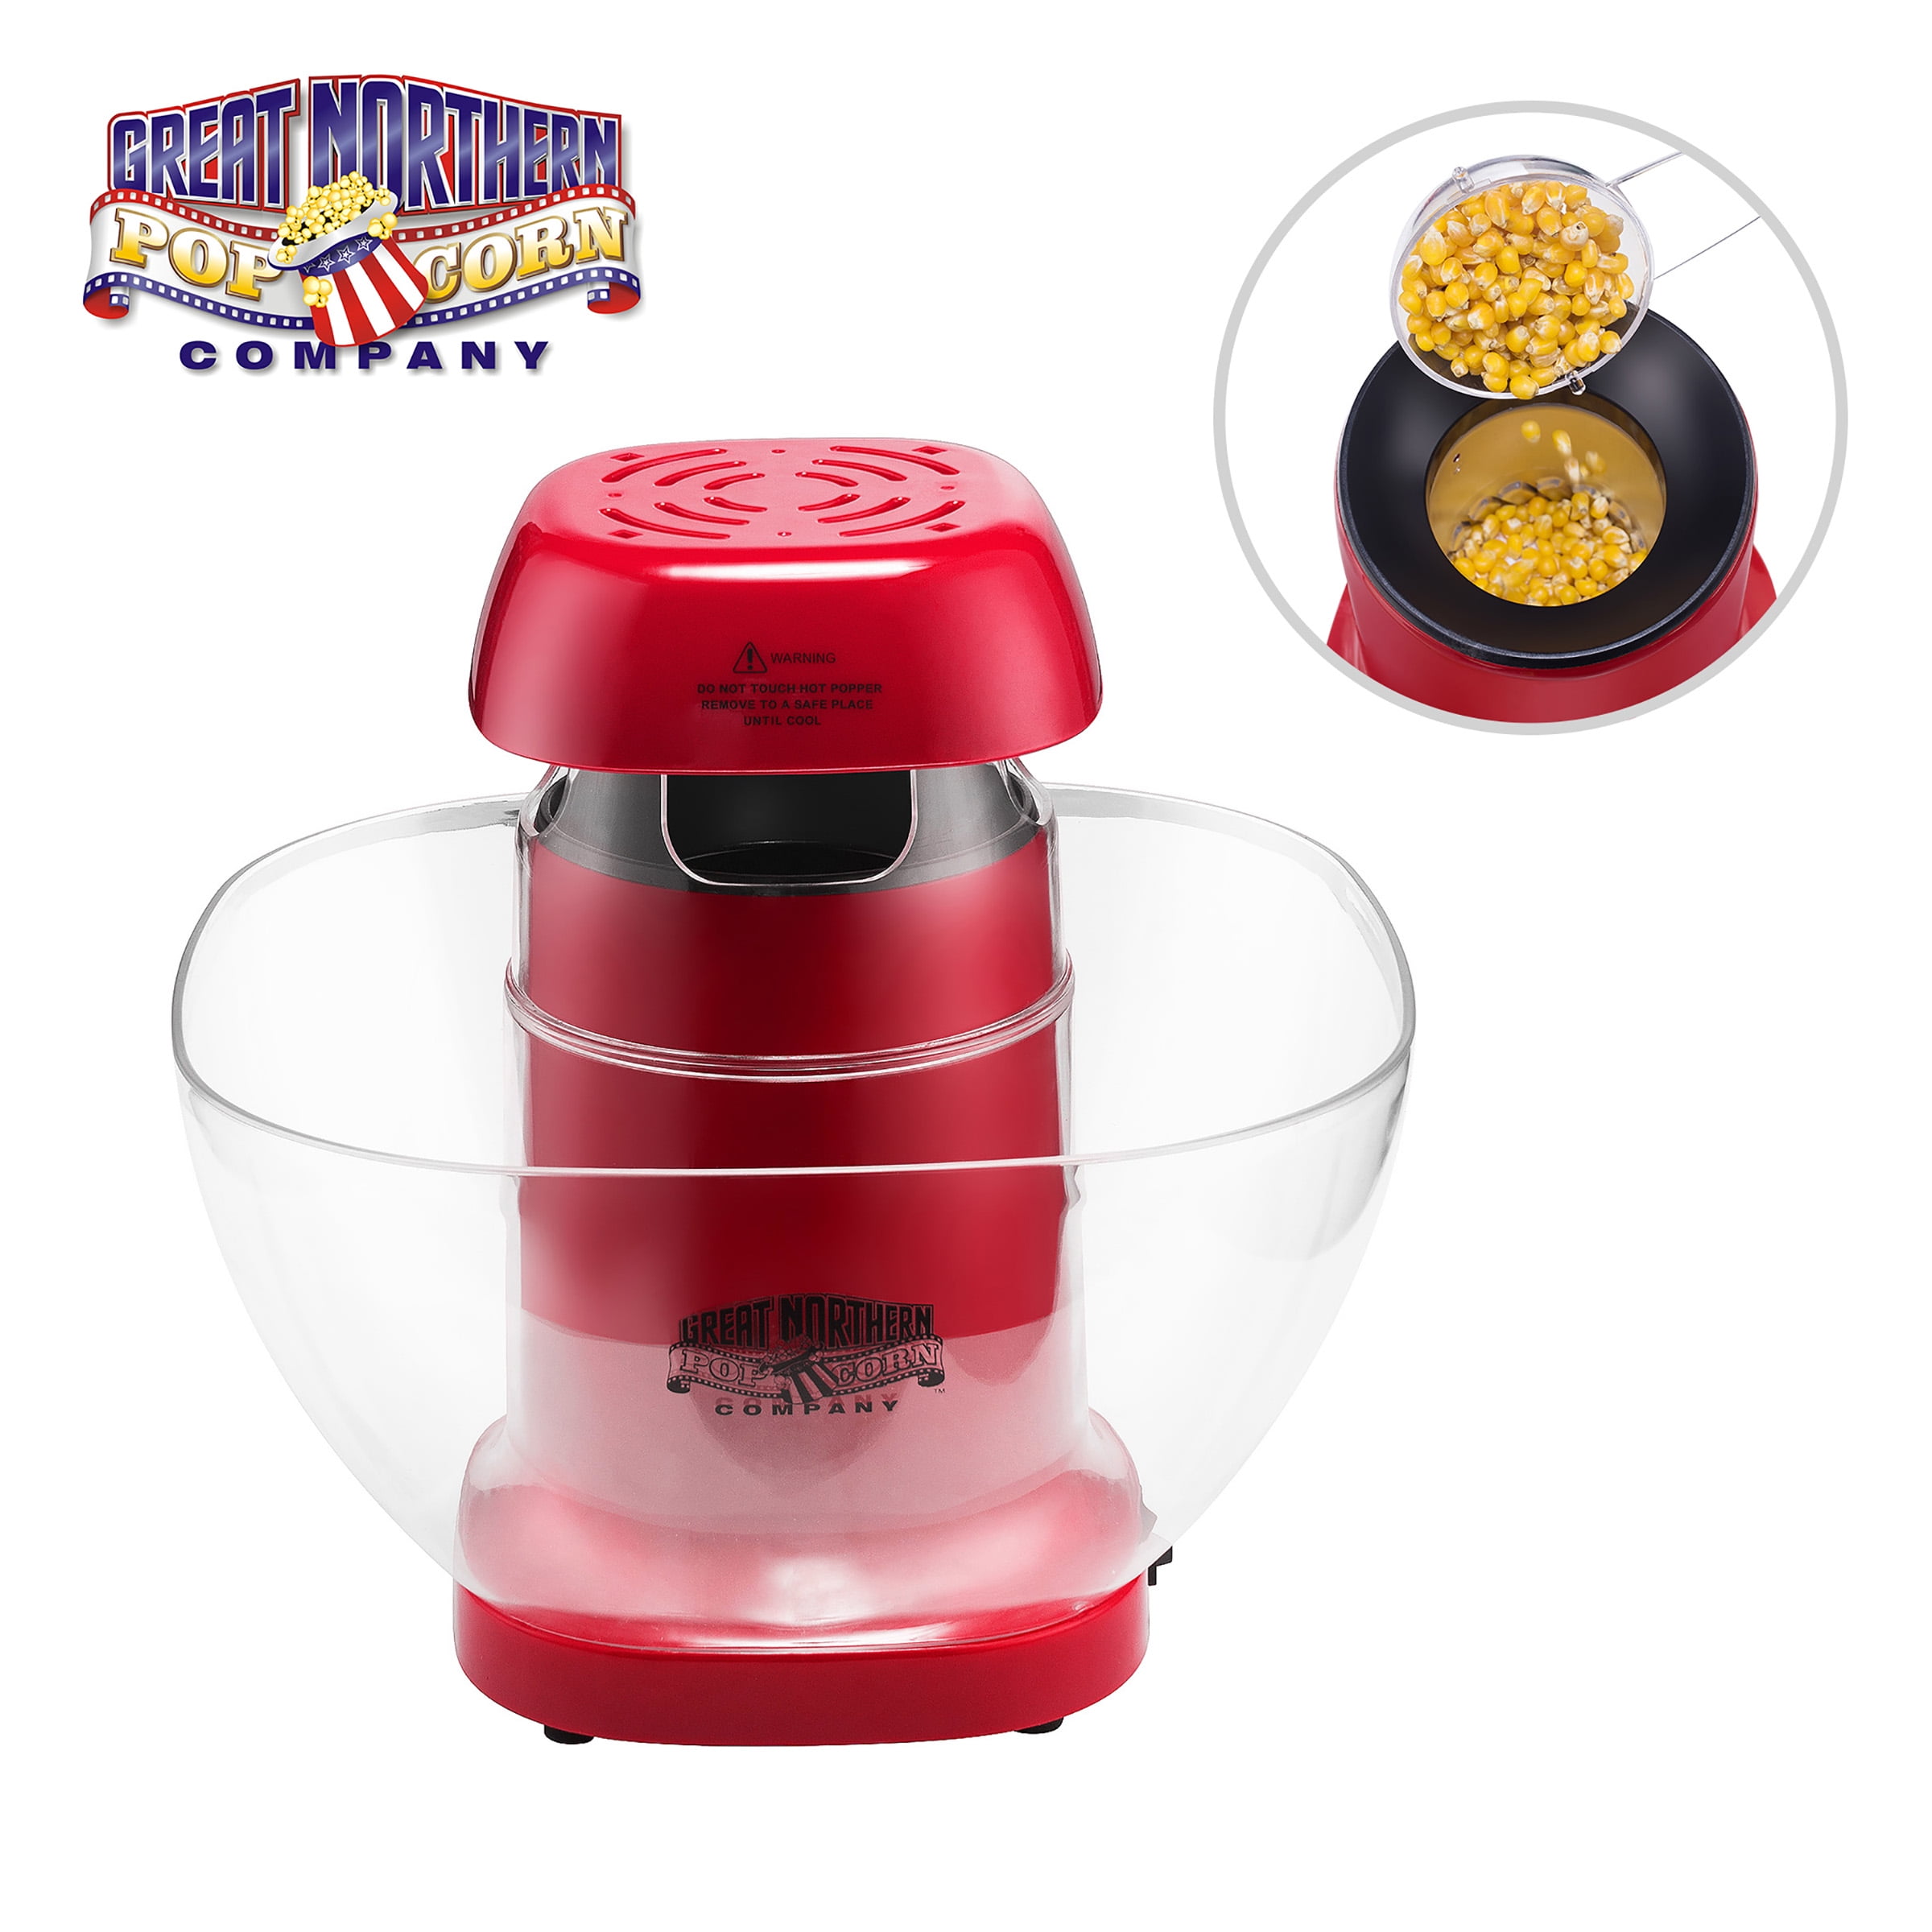 Hot Air Popcorn Popper - FFGHS40504 - Brilliant Promotional Products